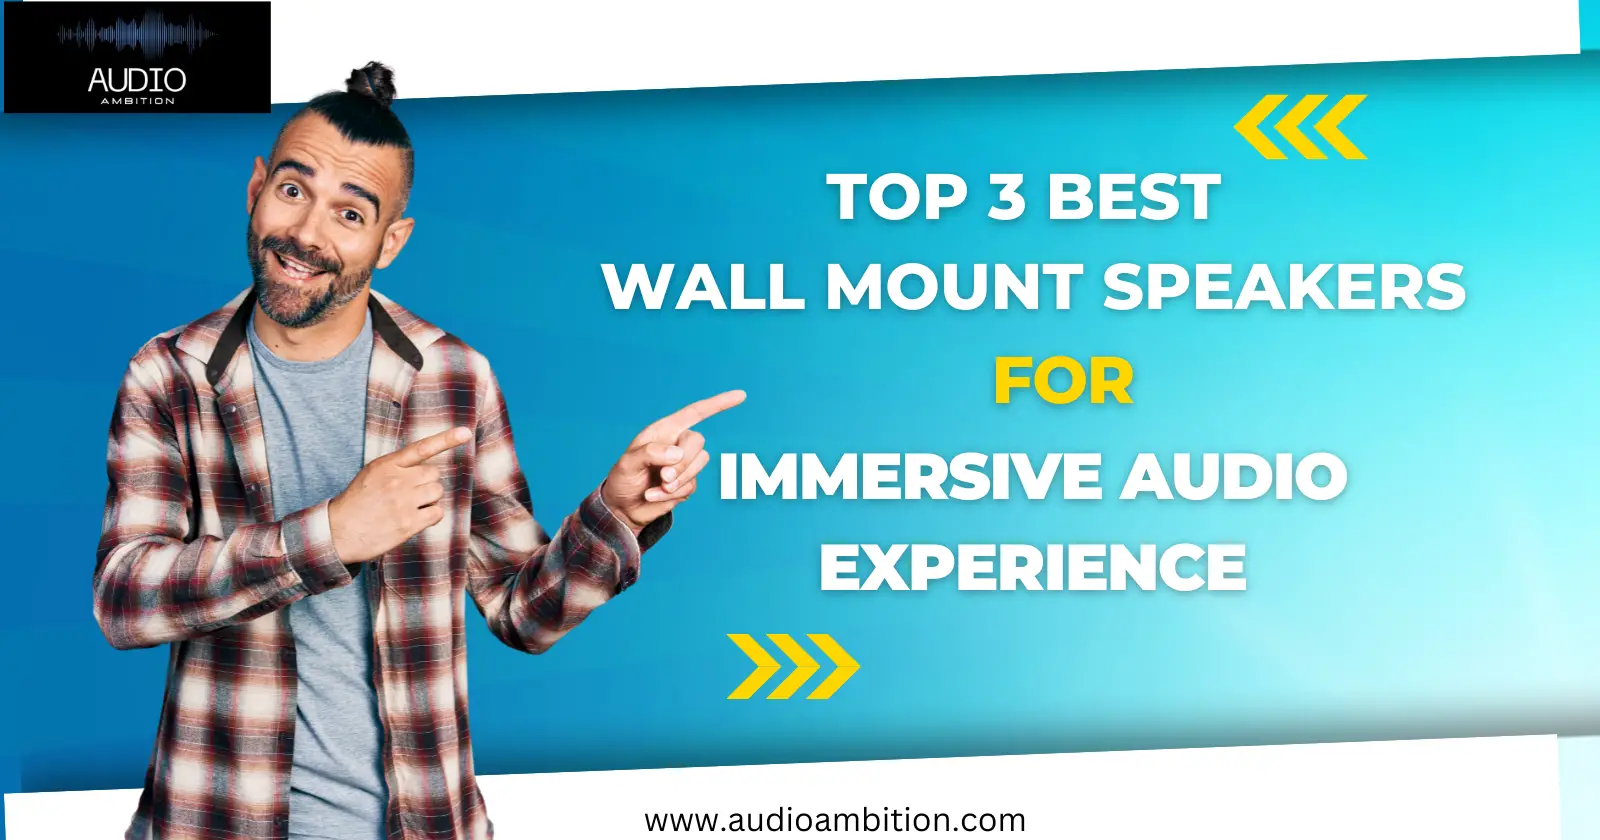 Top 3 Best Wall Mount Speakers for Immersive Audio Experience